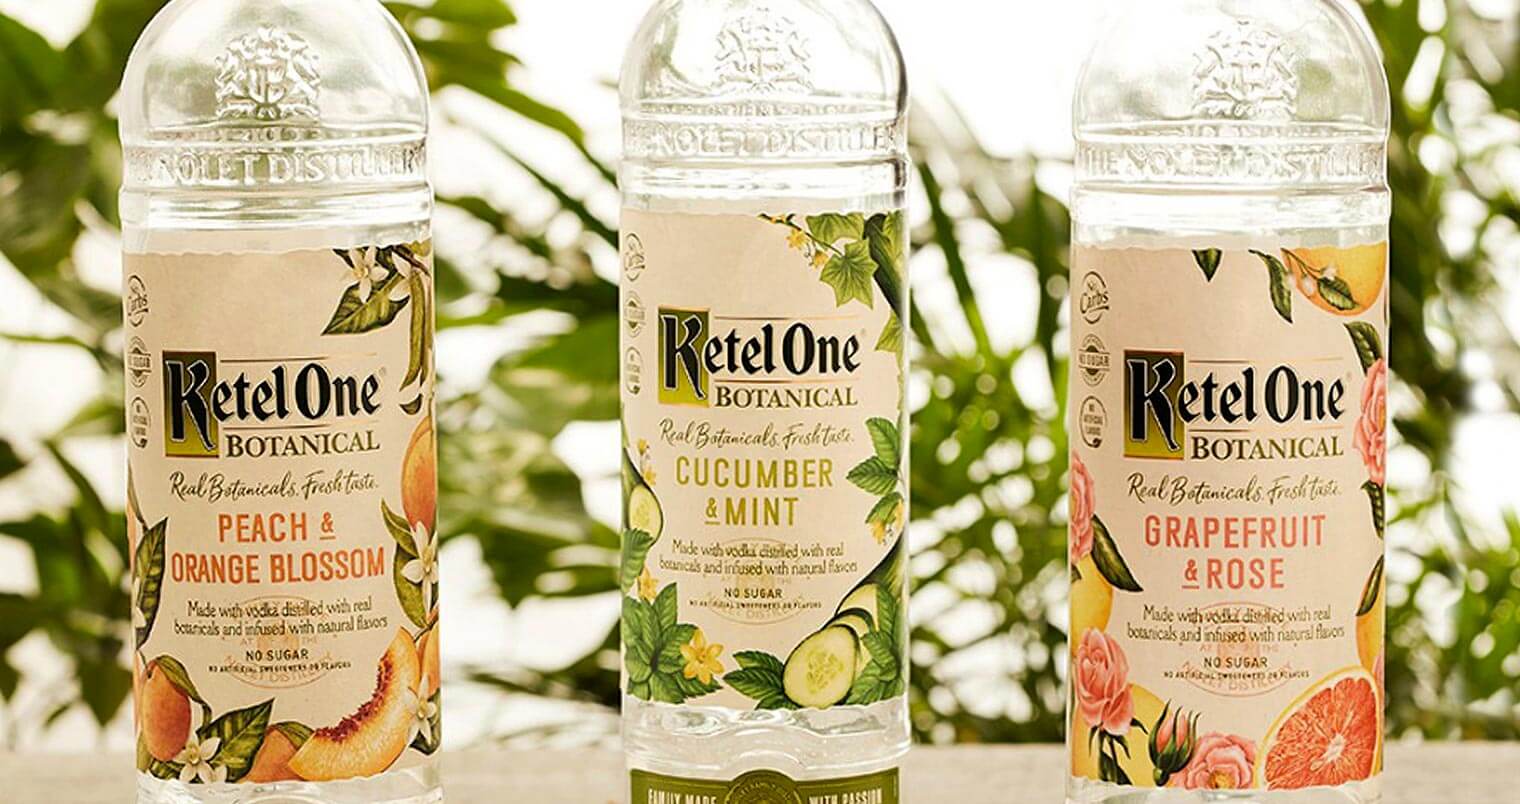 Ketel One Botanical, bottles with natural background, featured image